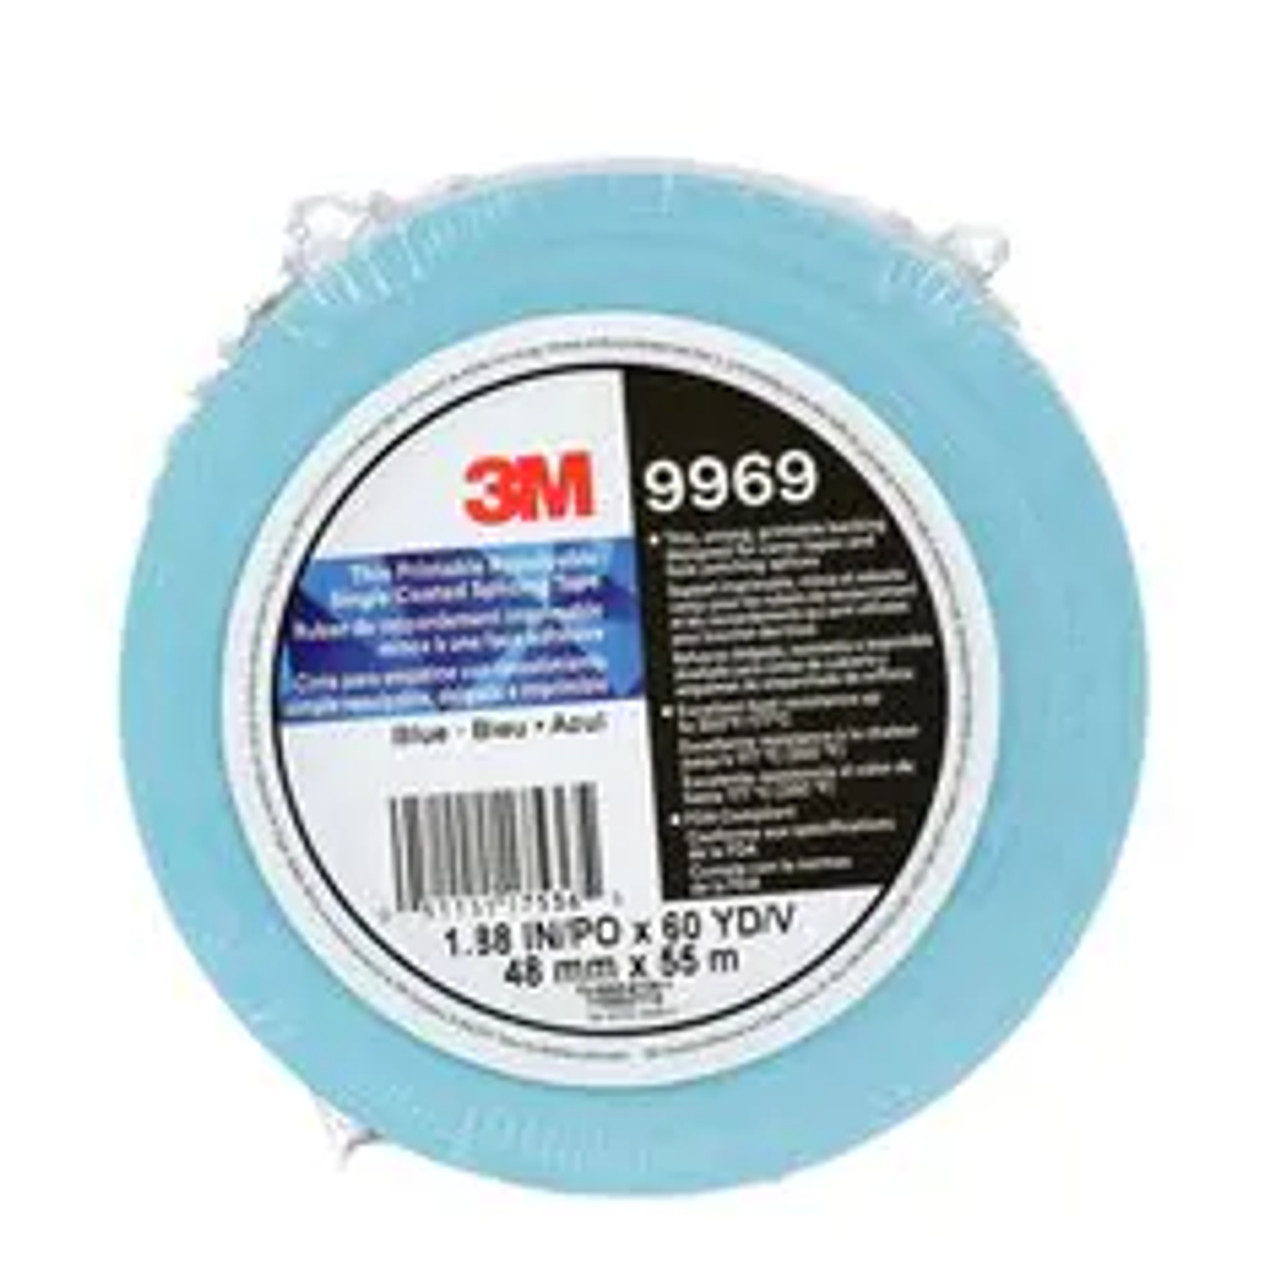 Thin Printable Repulpable Single Coated Splicing Tape 9969W